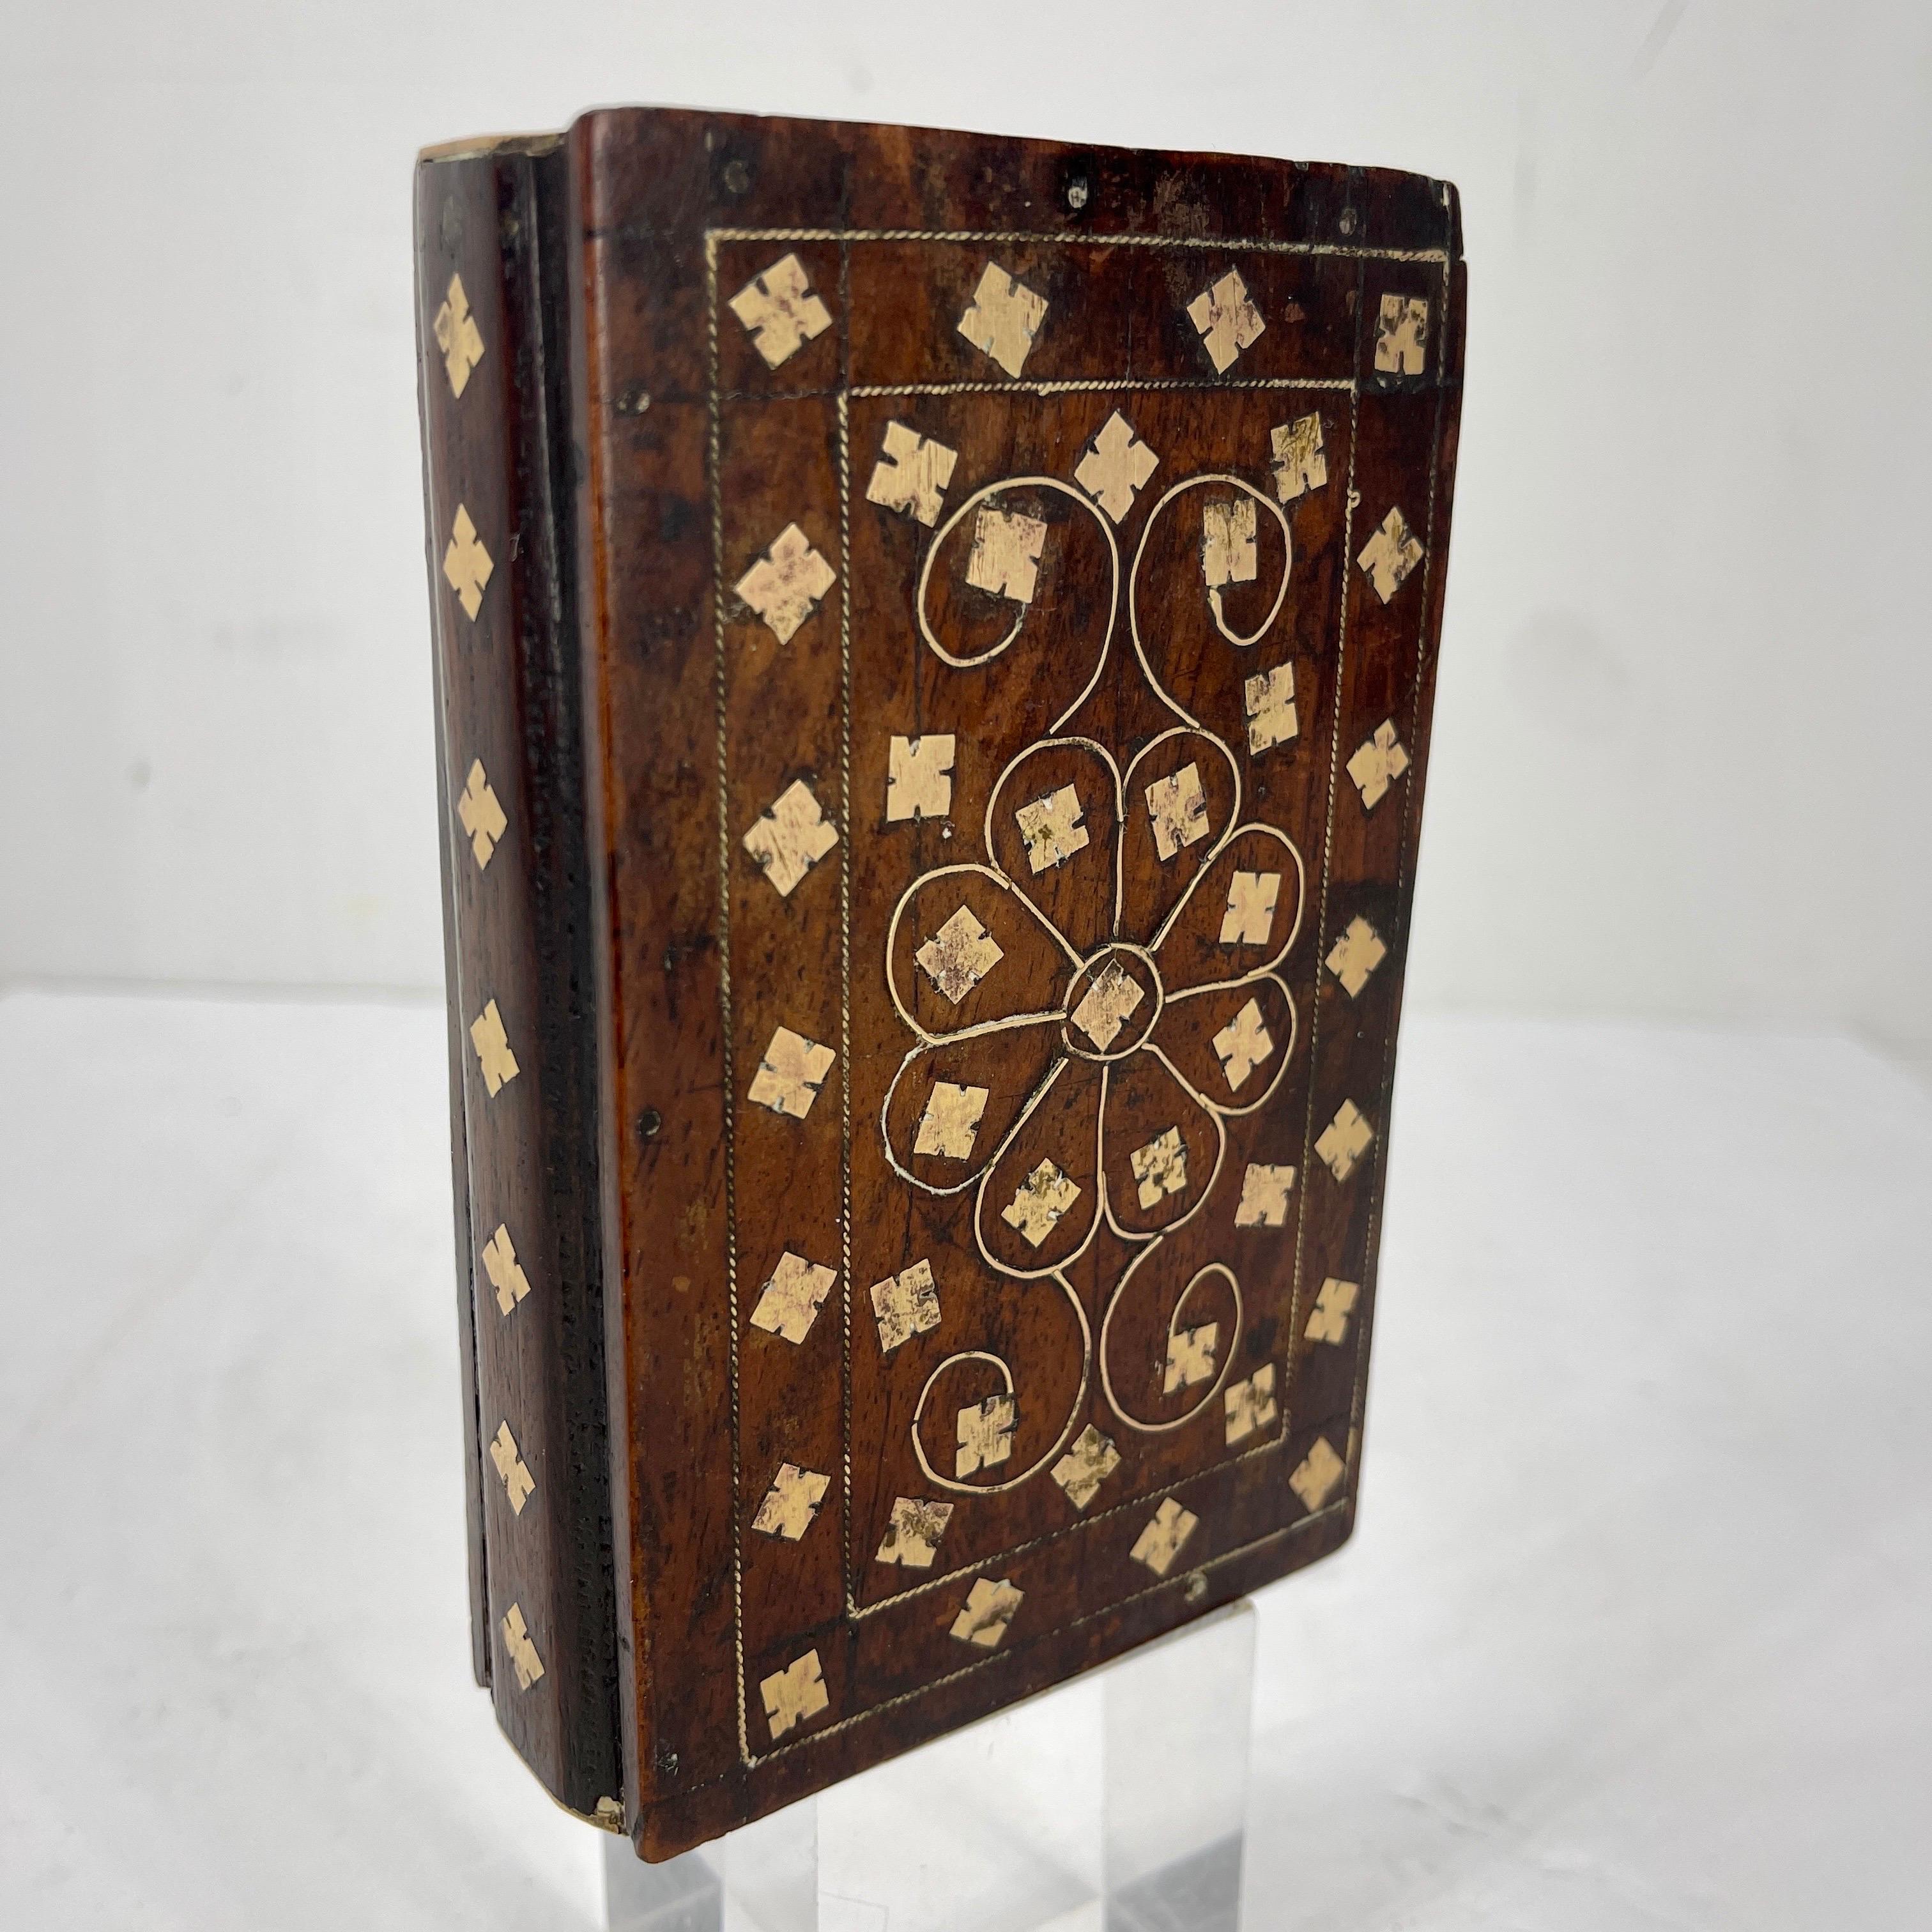 Antique wood faux book with hidden compartment. Designed to appear as a beautiful book, this wood box is the perfect place to store your treasures. The brass inlay is striking against the aged wood. The interior opens to reveal a drawer for your